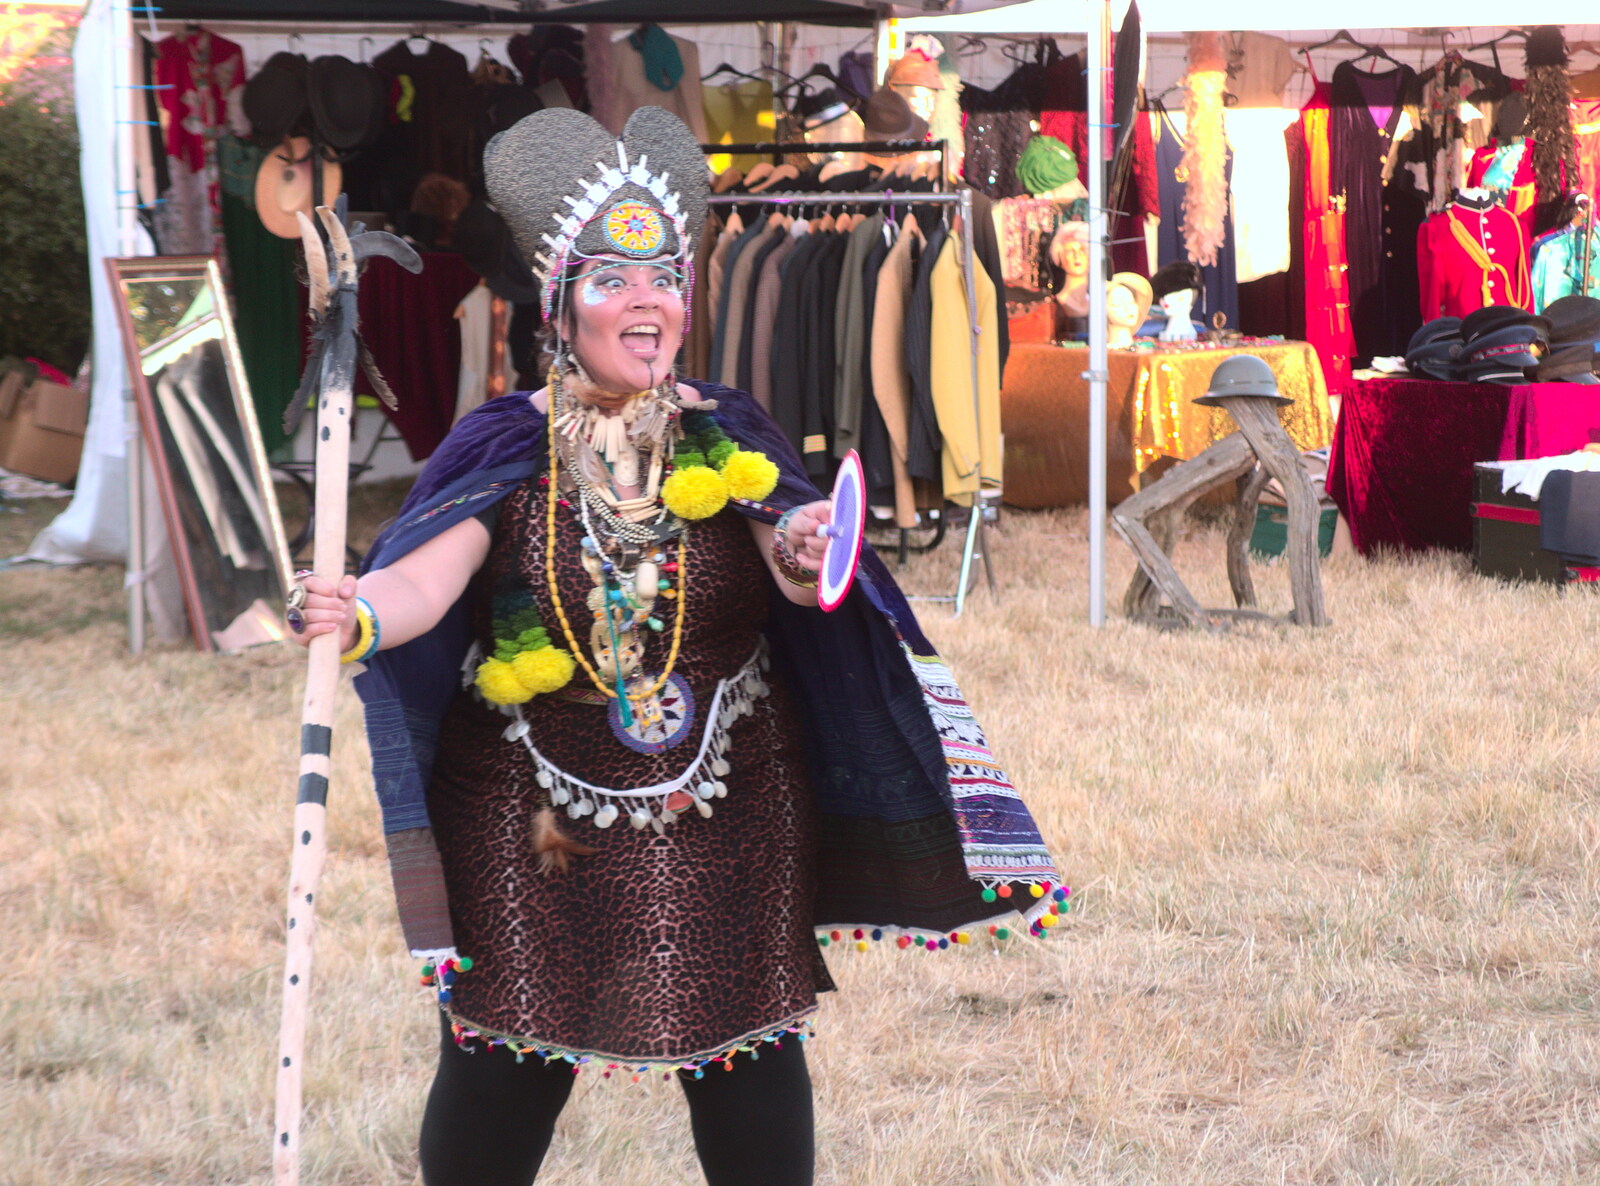 More crazy Mexican/Inca action from WoW Festival, Burston, Norfolk - 29th June - 1st July 2018